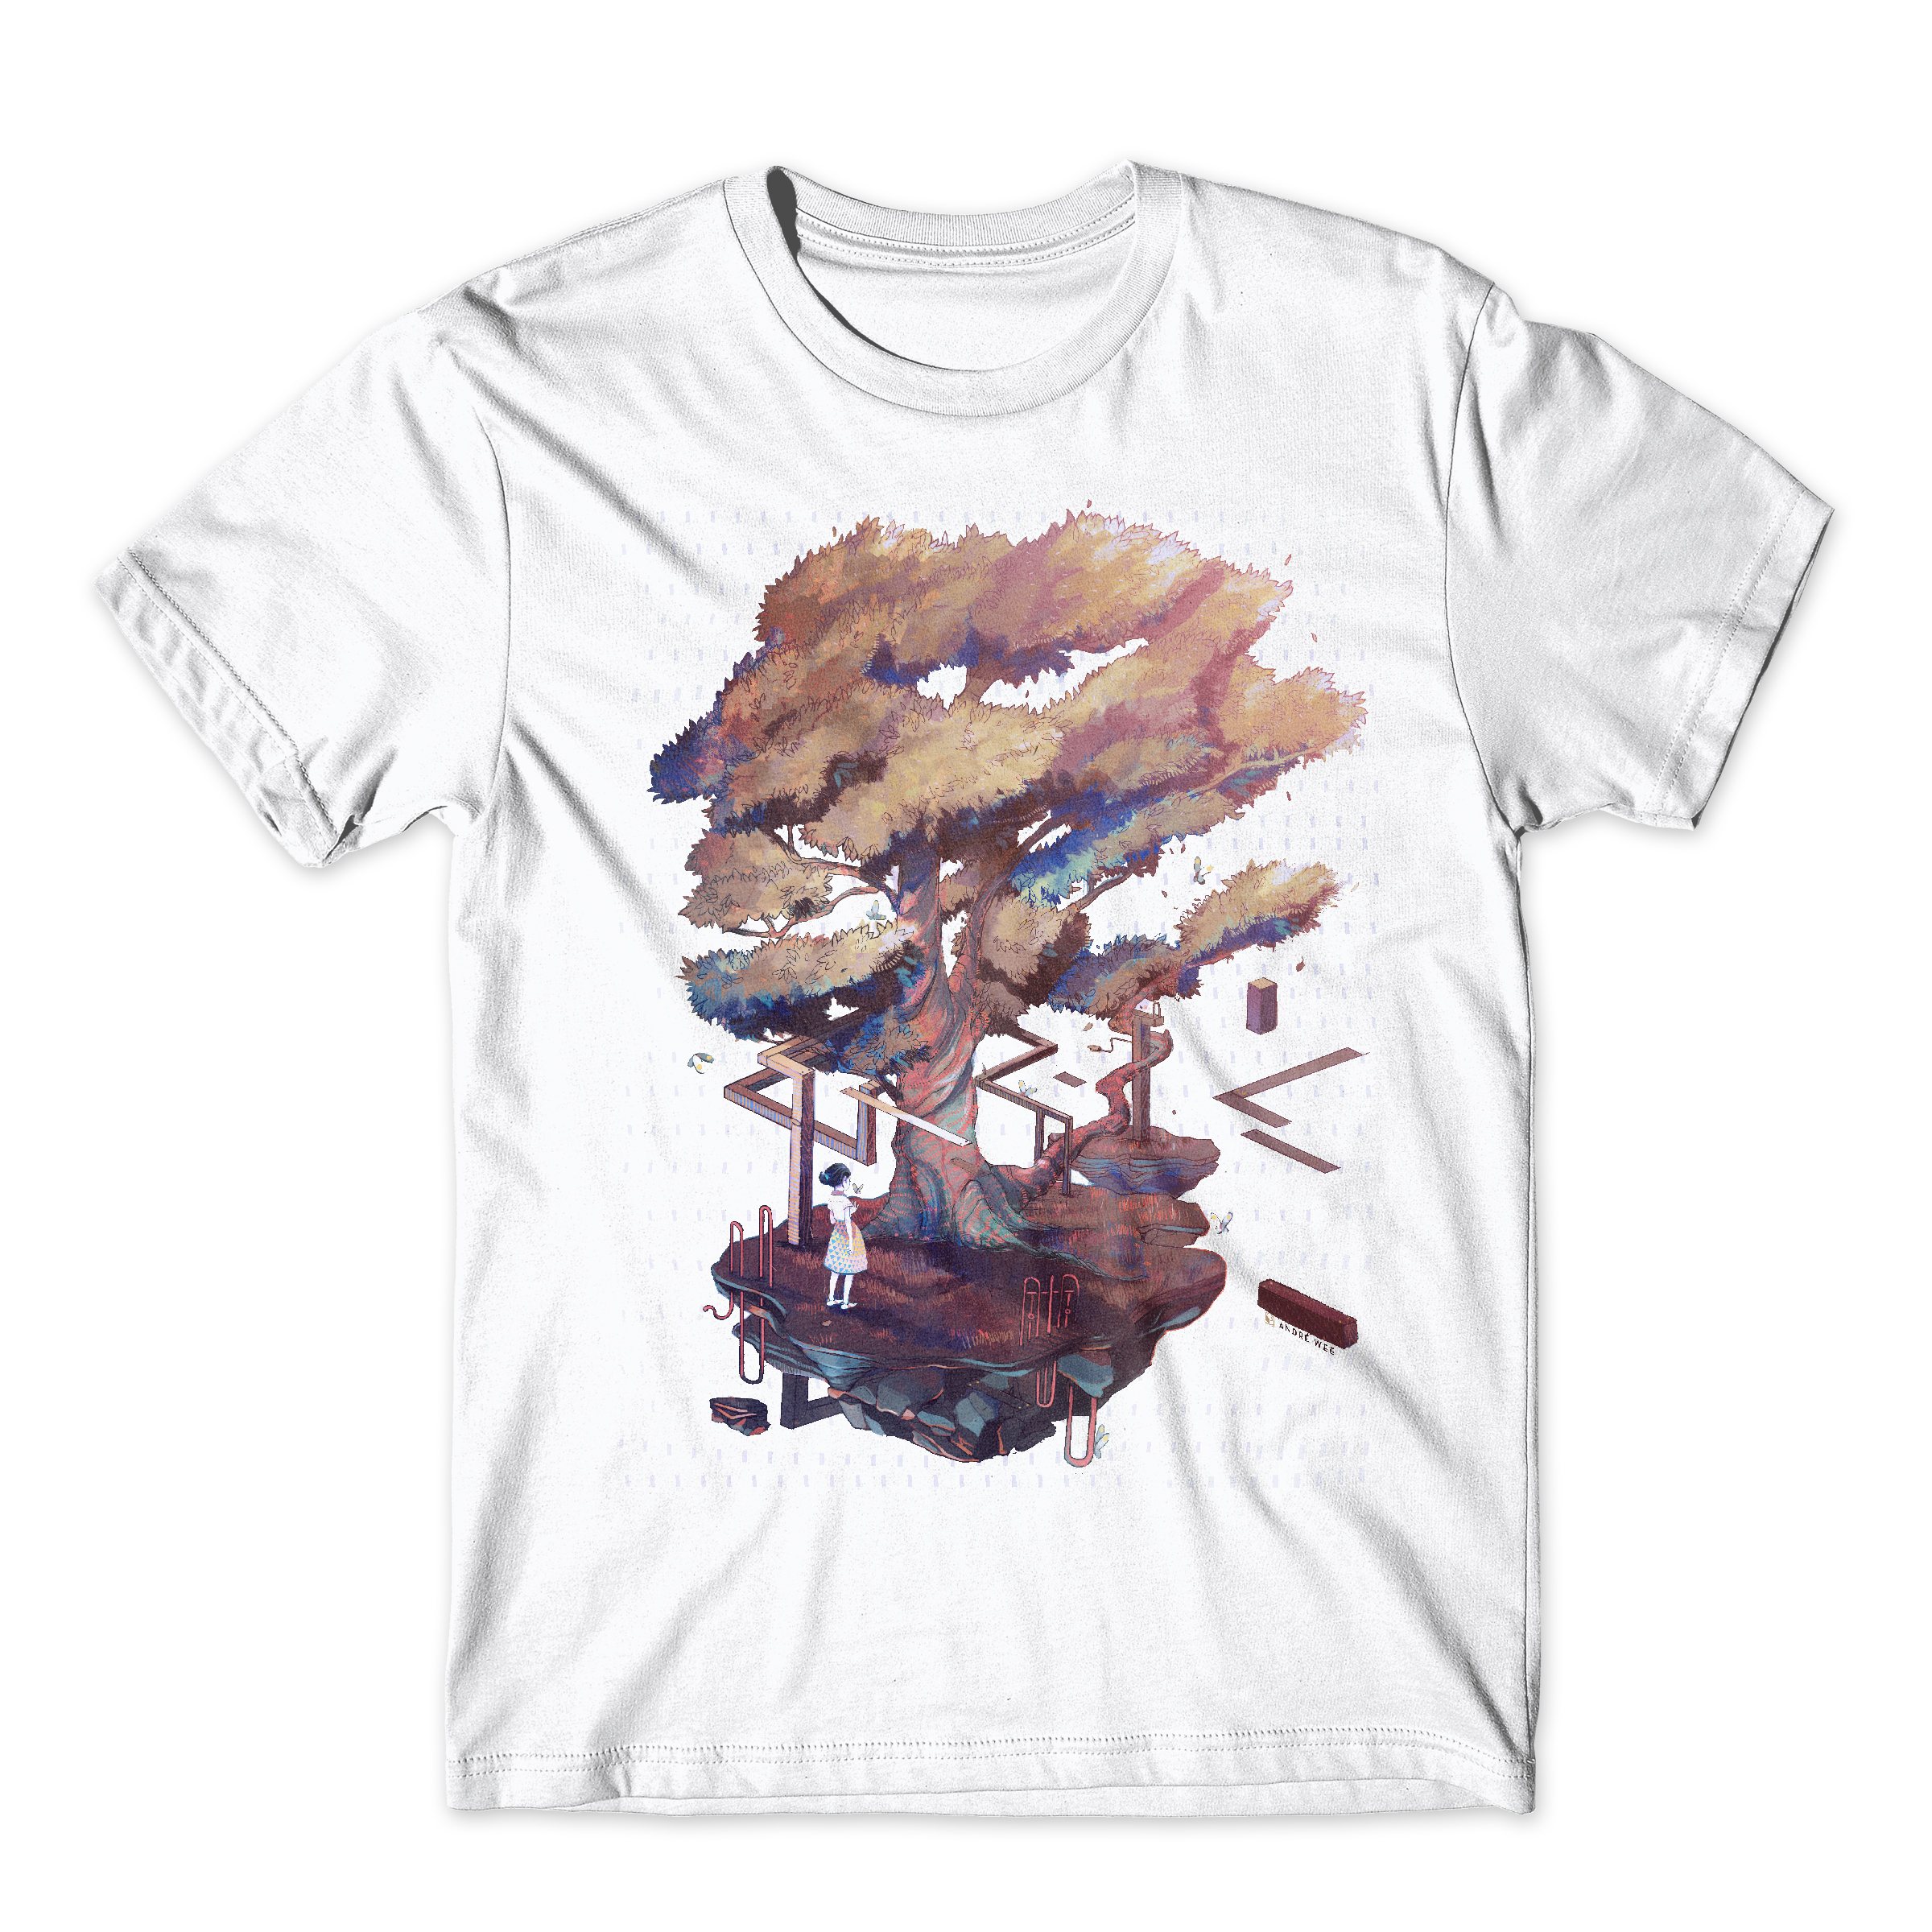 Andre_wee_TShirt-Realistic-Template-03-Front.jpg